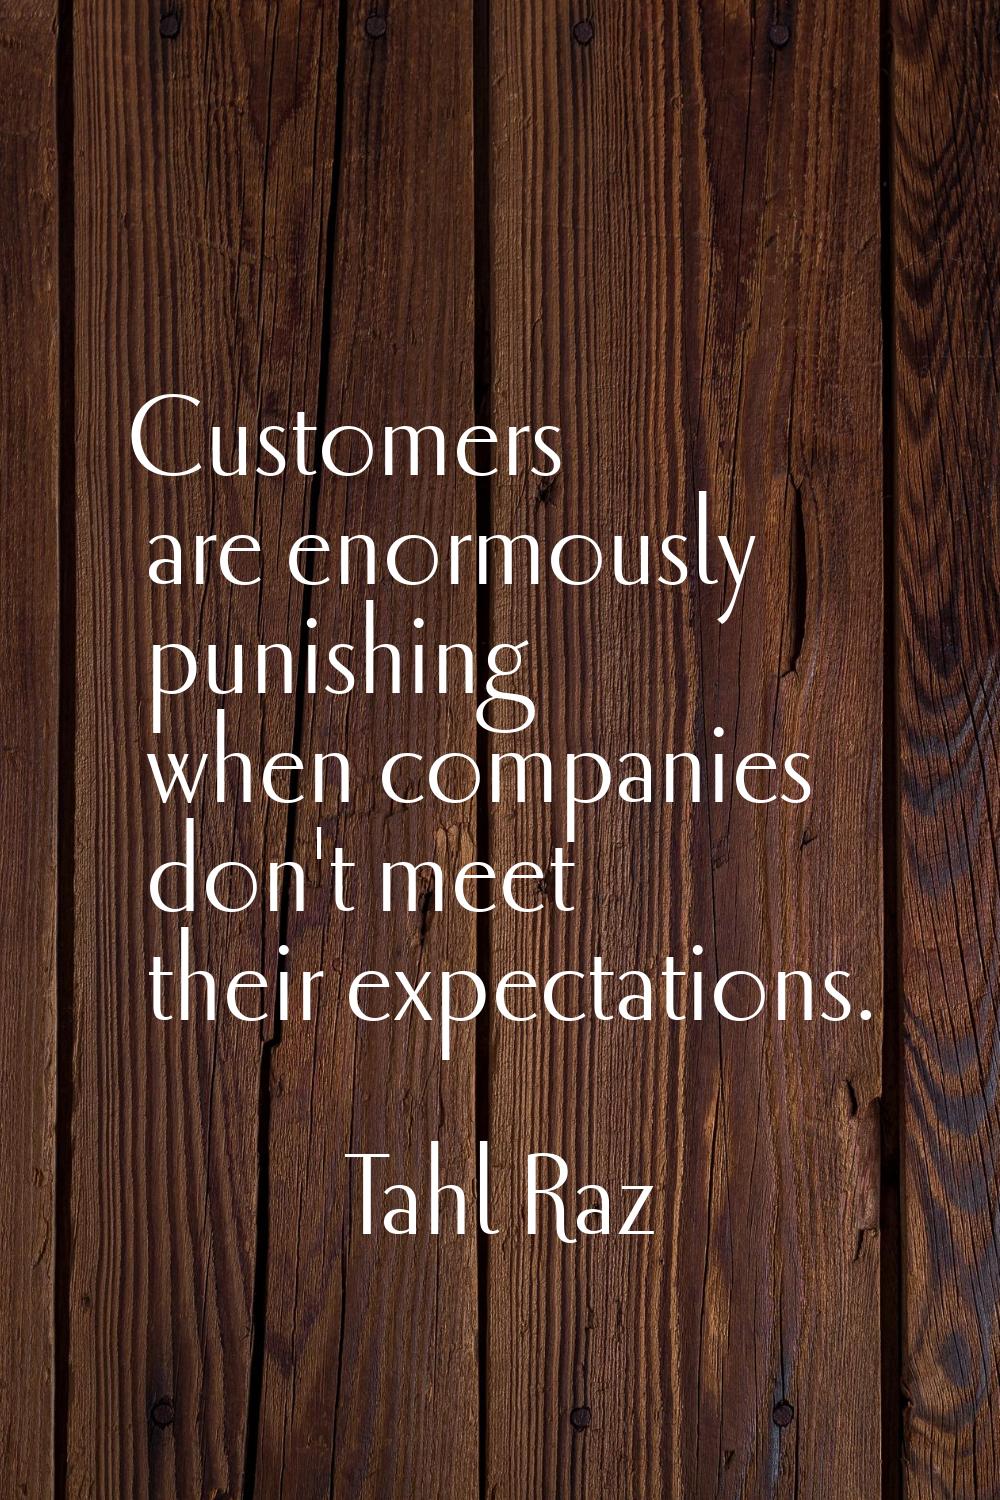 Customers are enormously punishing when companies don't meet their expectations.